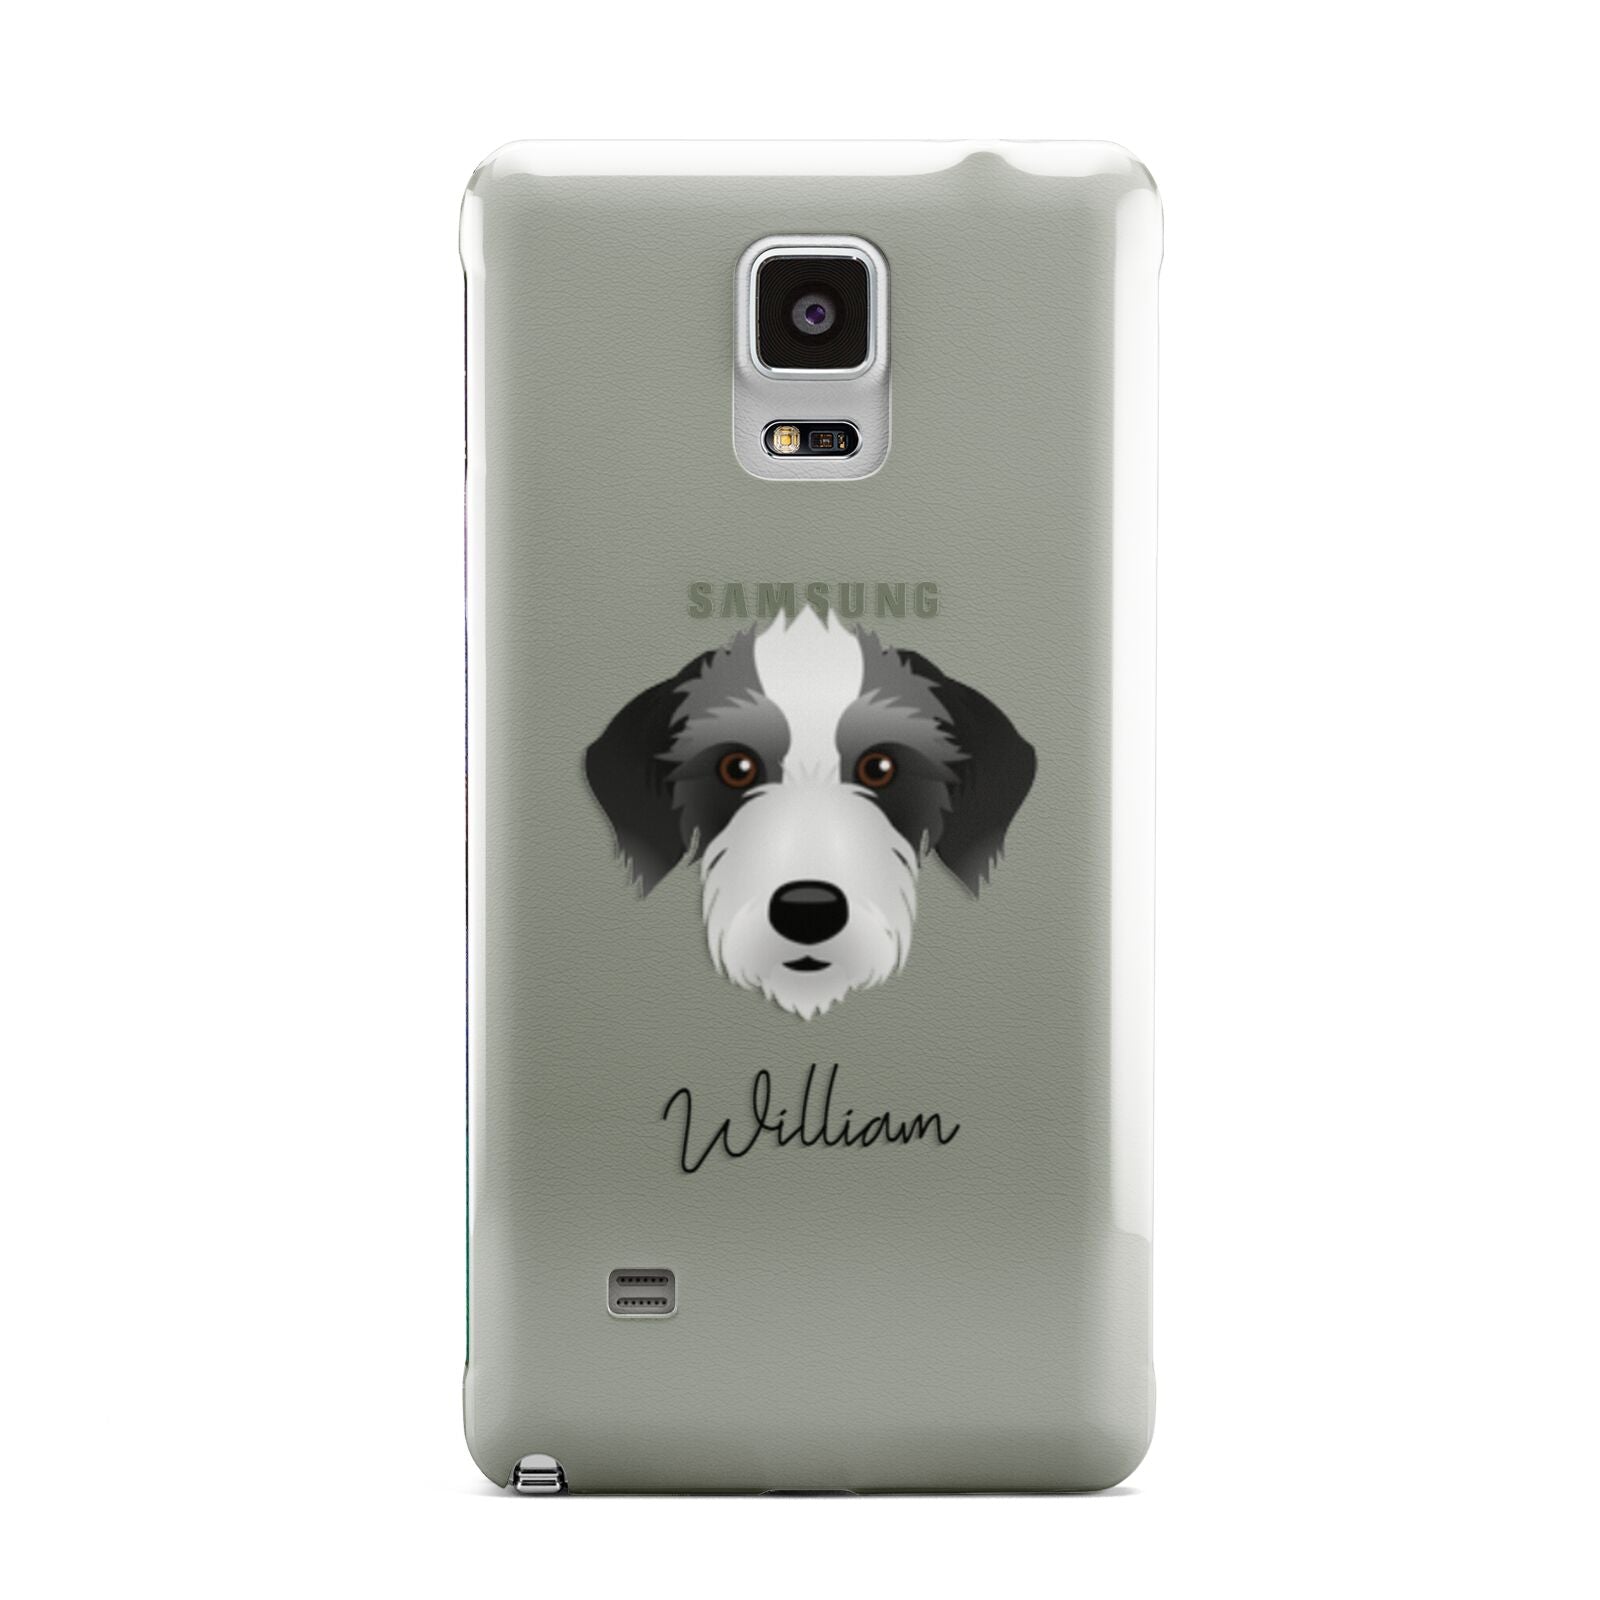 Bedlington Whippet Personalised Samsung Galaxy Note 4 Case